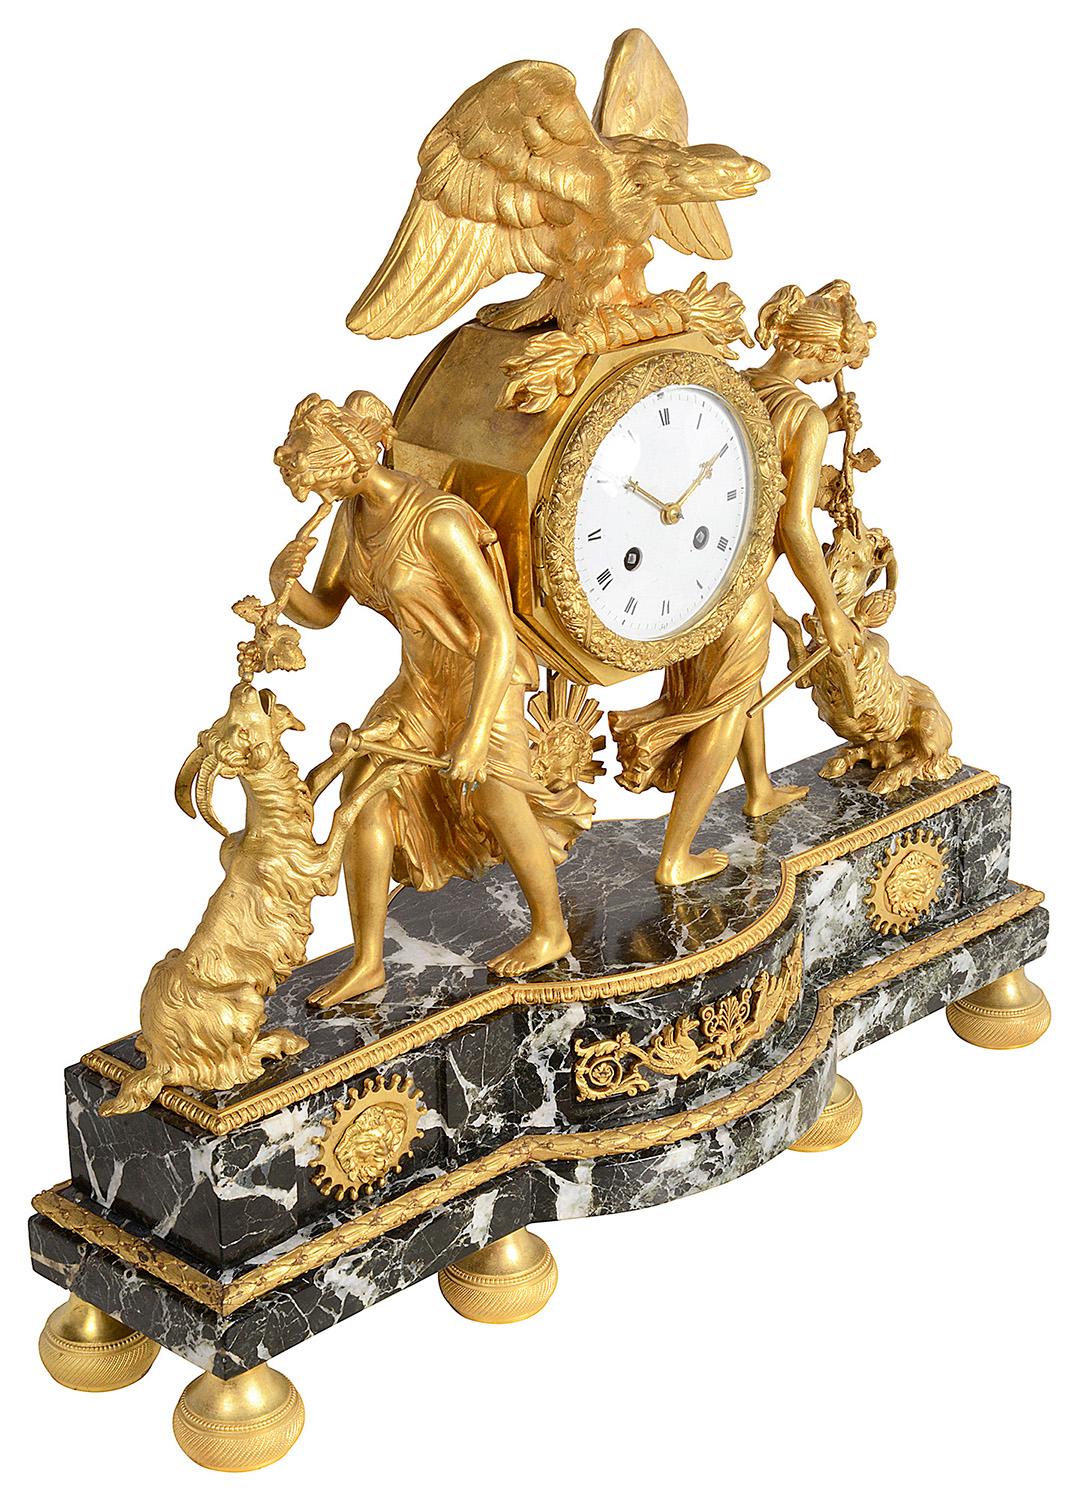 French Empire Style Mantel Clock, circa 1820 In Good Condition For Sale In Brighton, Sussex